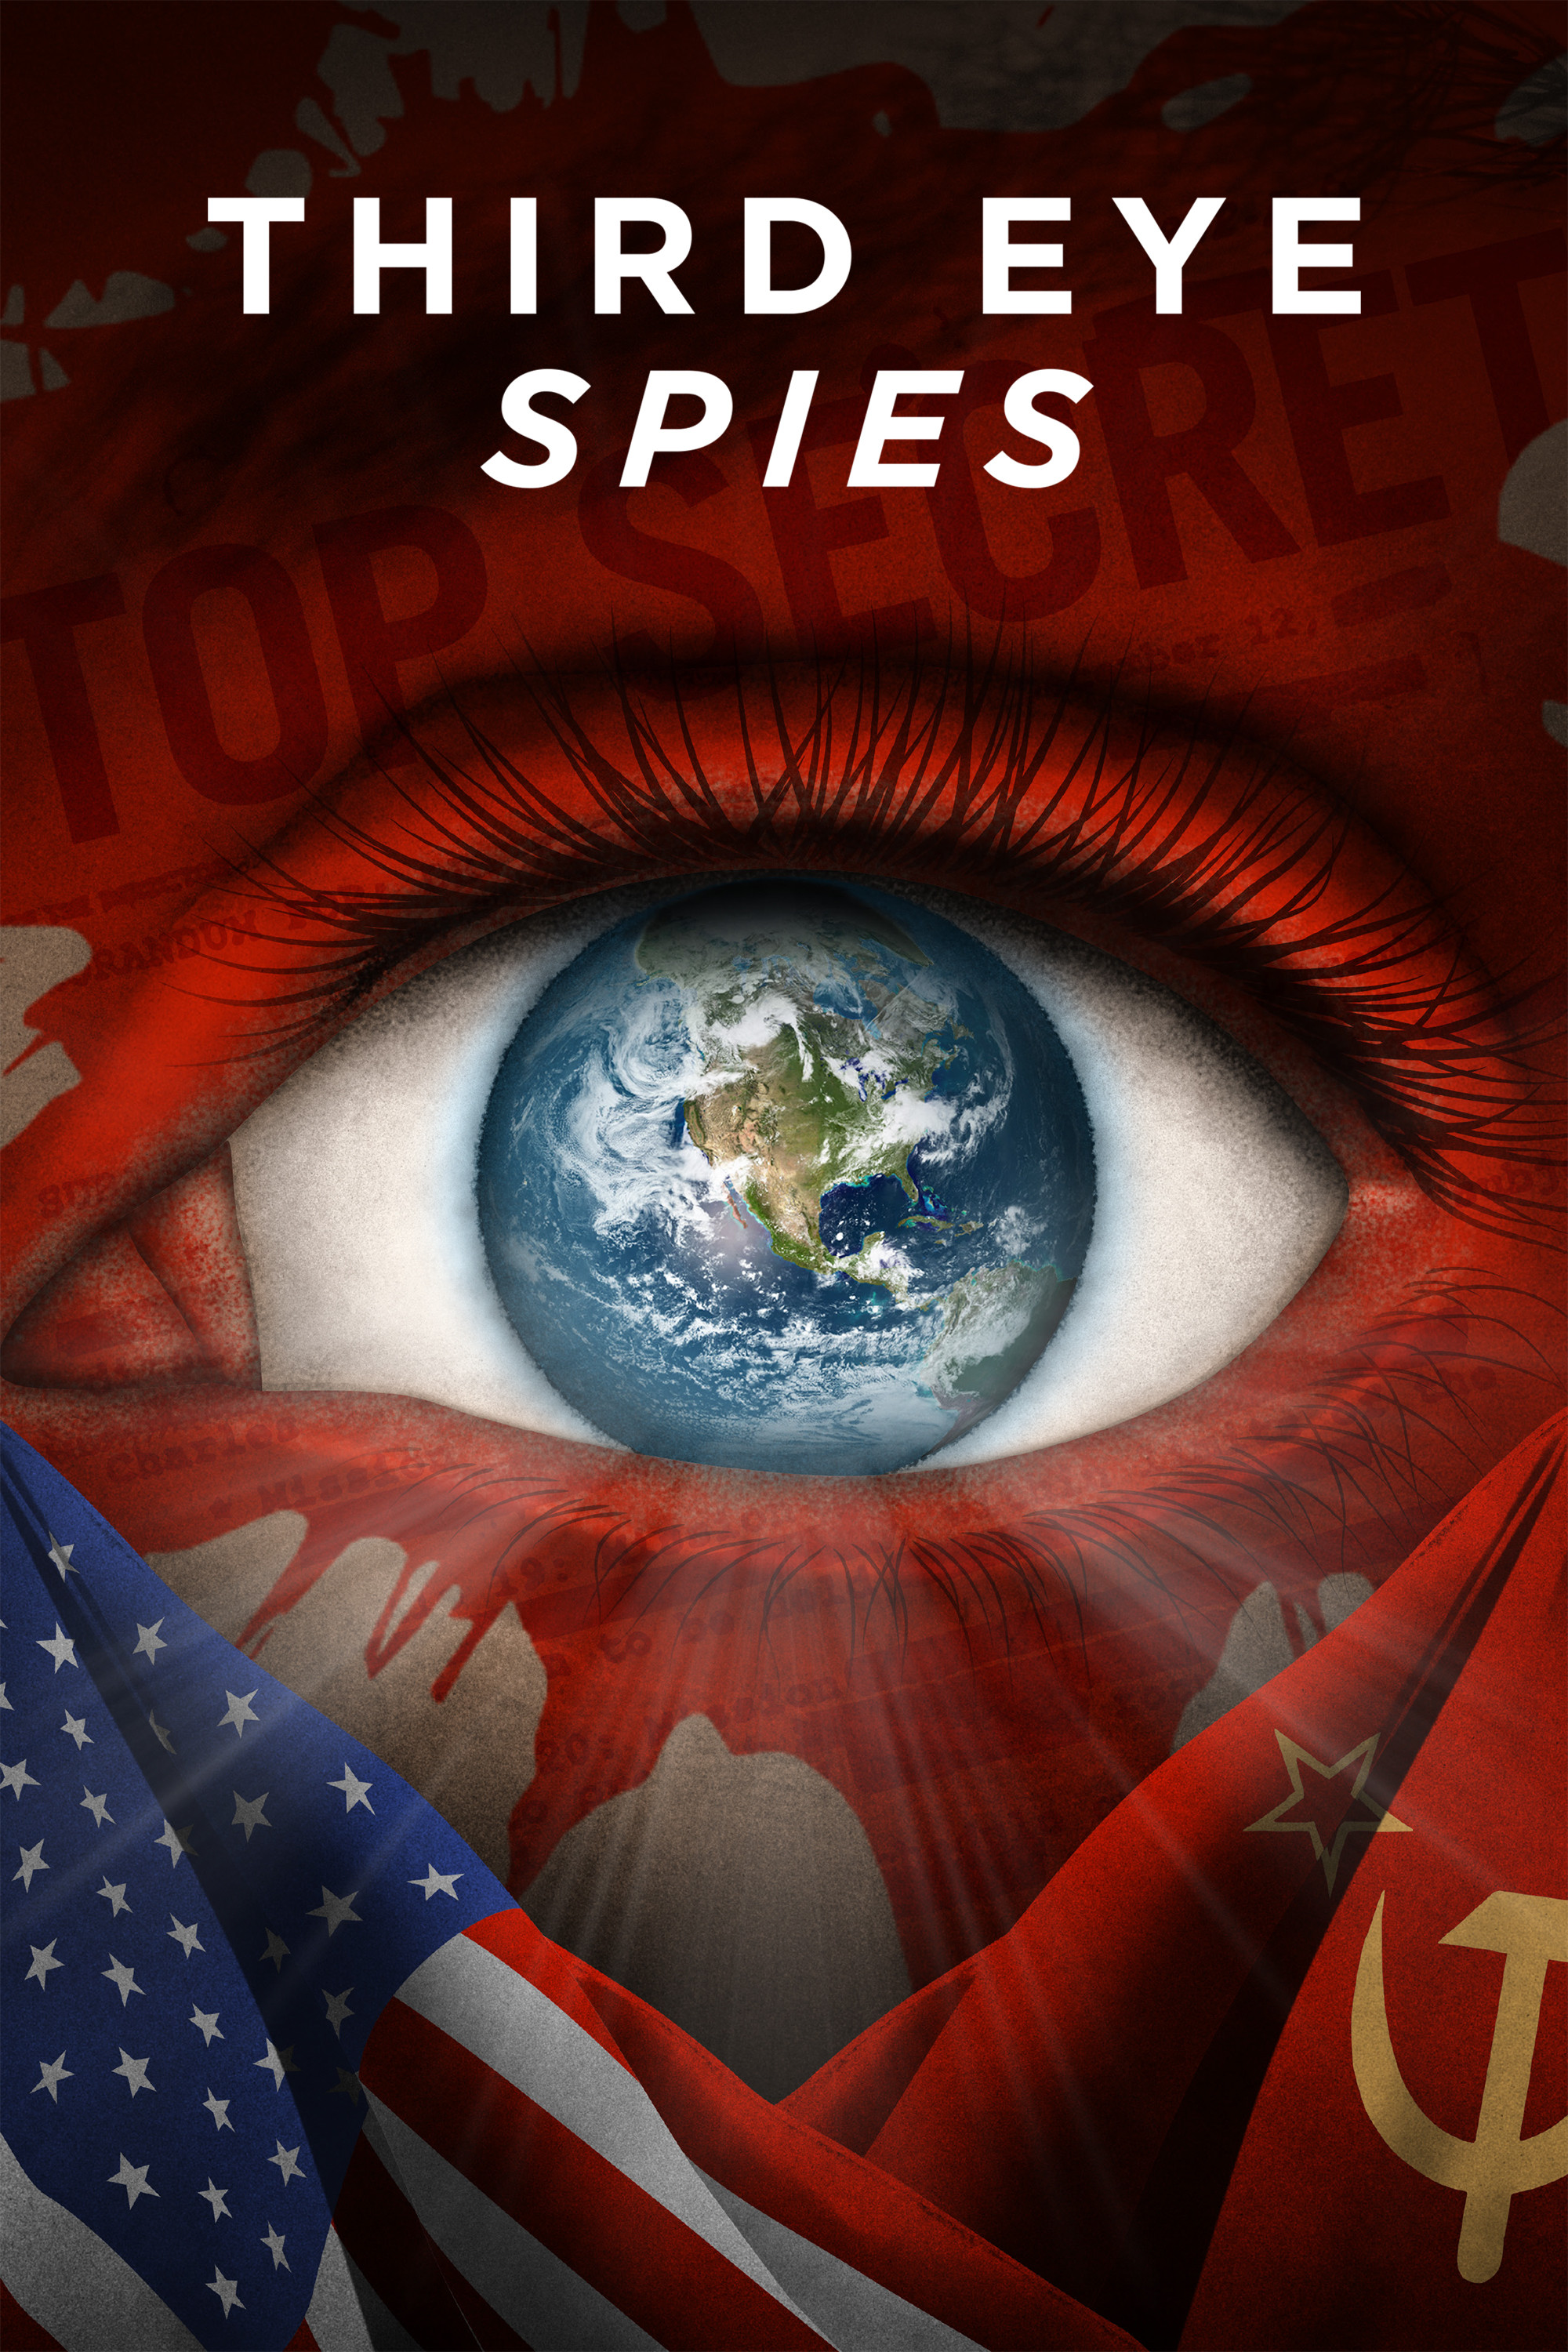 LRM EXCLUSIVE Third Eye Spies Clip Reveals Use Of Psychic Spies In The CIA